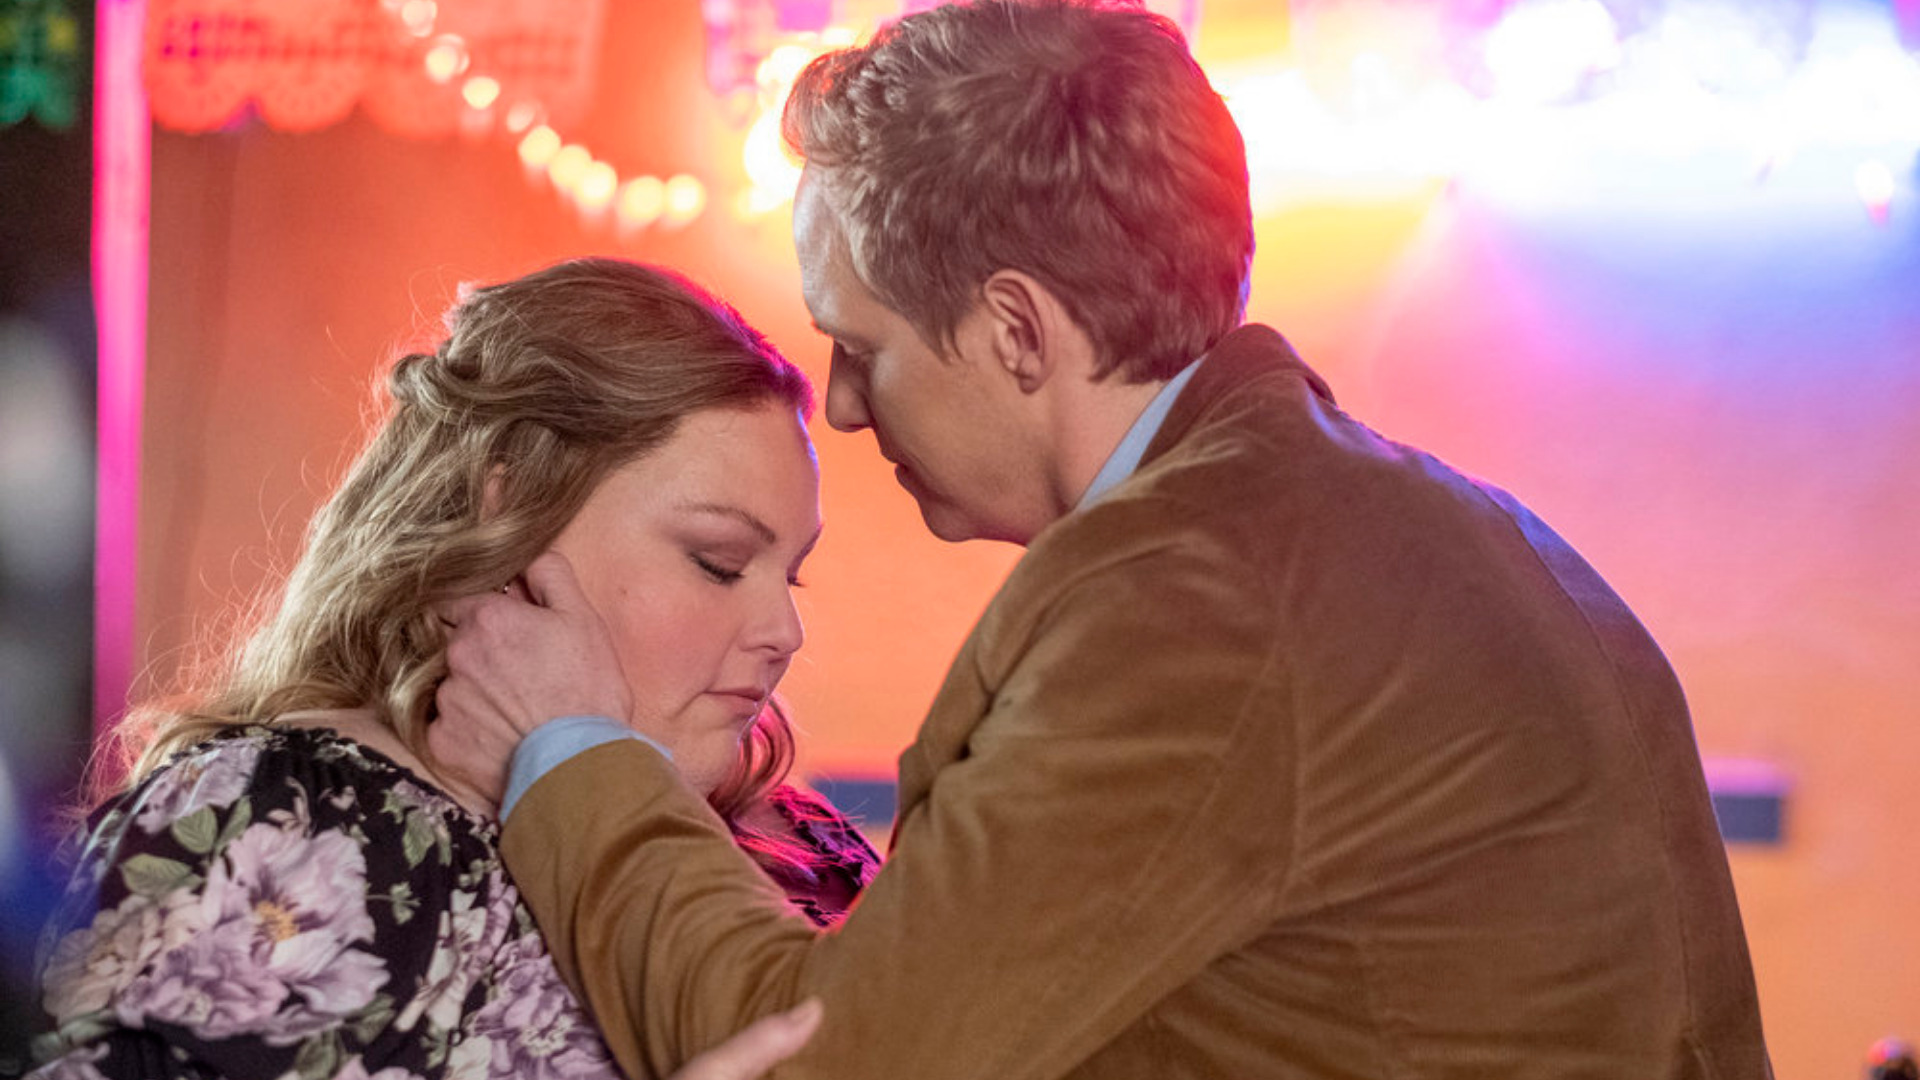 Chrissy Metz as Kate and Chris Geere as Phillip share a moment together in ‘This Is Us’ Season 6 Episode 12